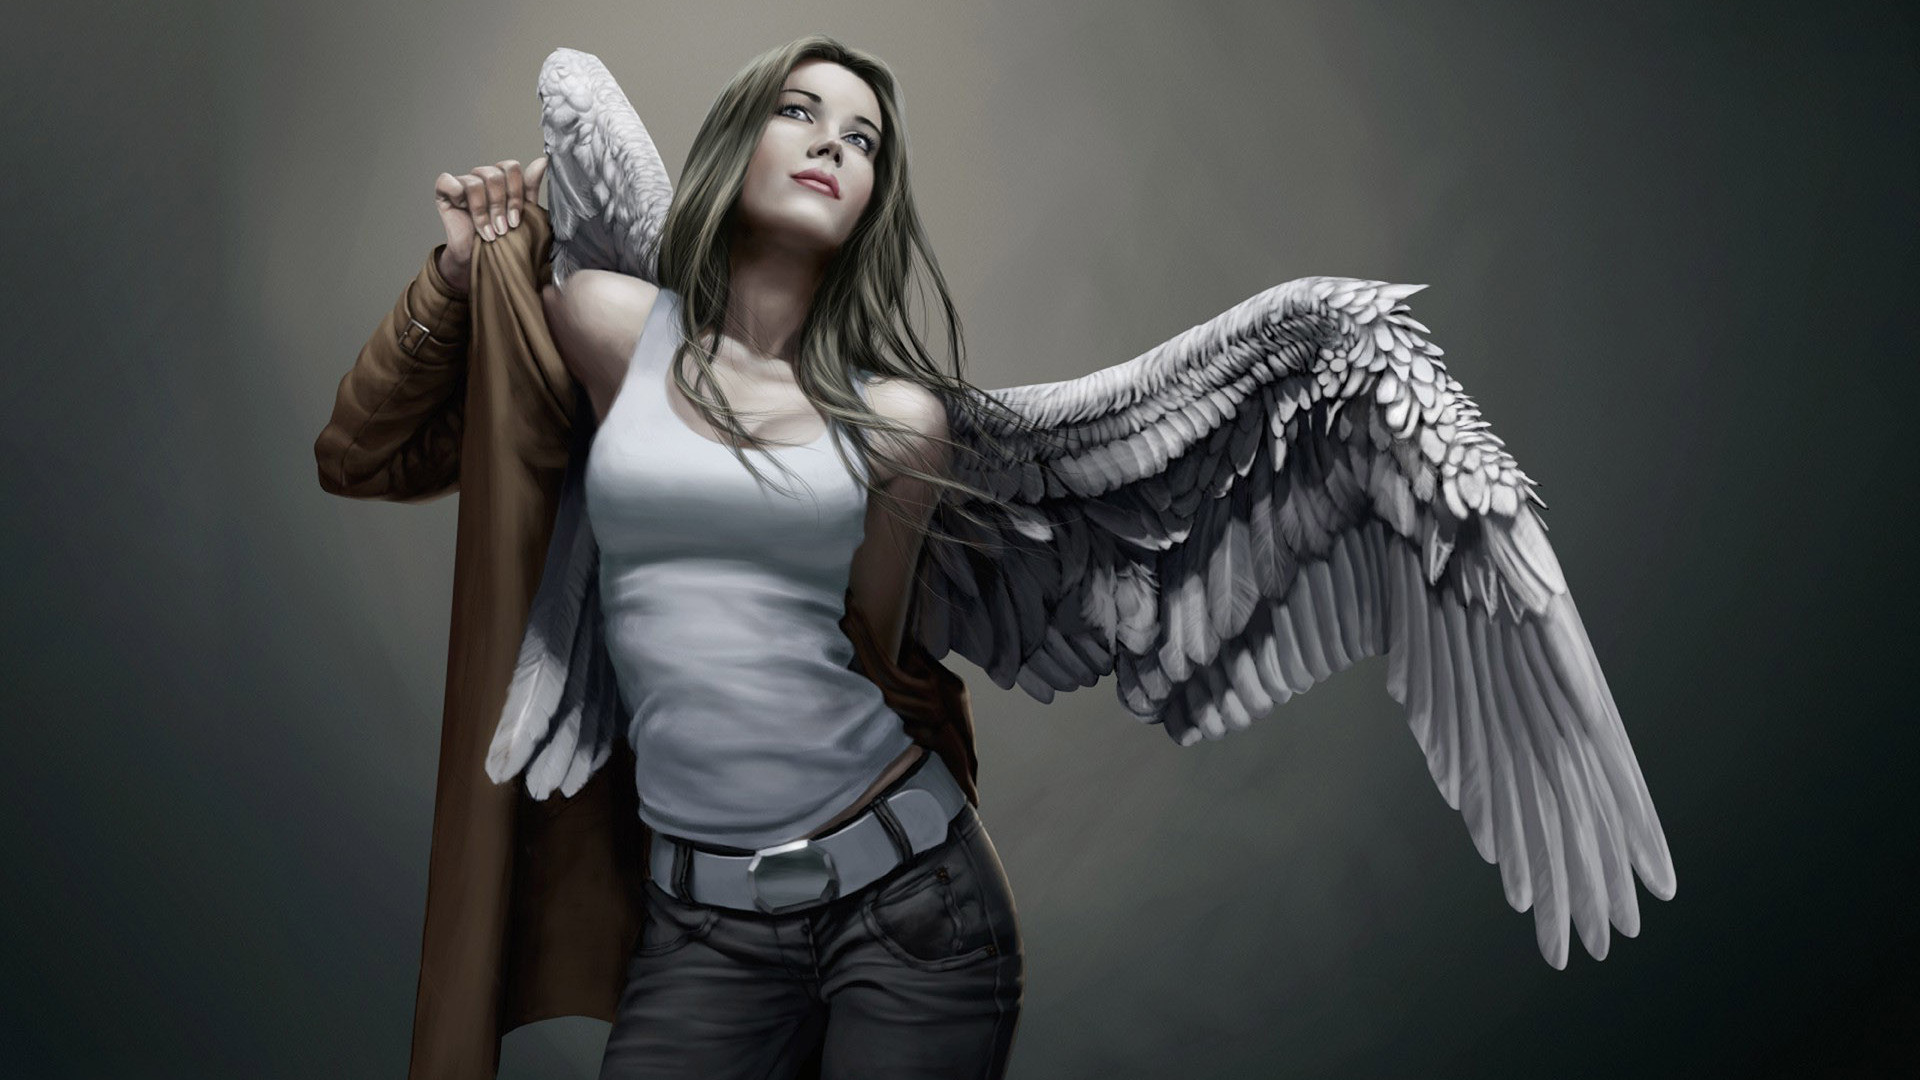 1920x1080 ... Cool Wallpapers: Angel Mobile Background Pictures ...